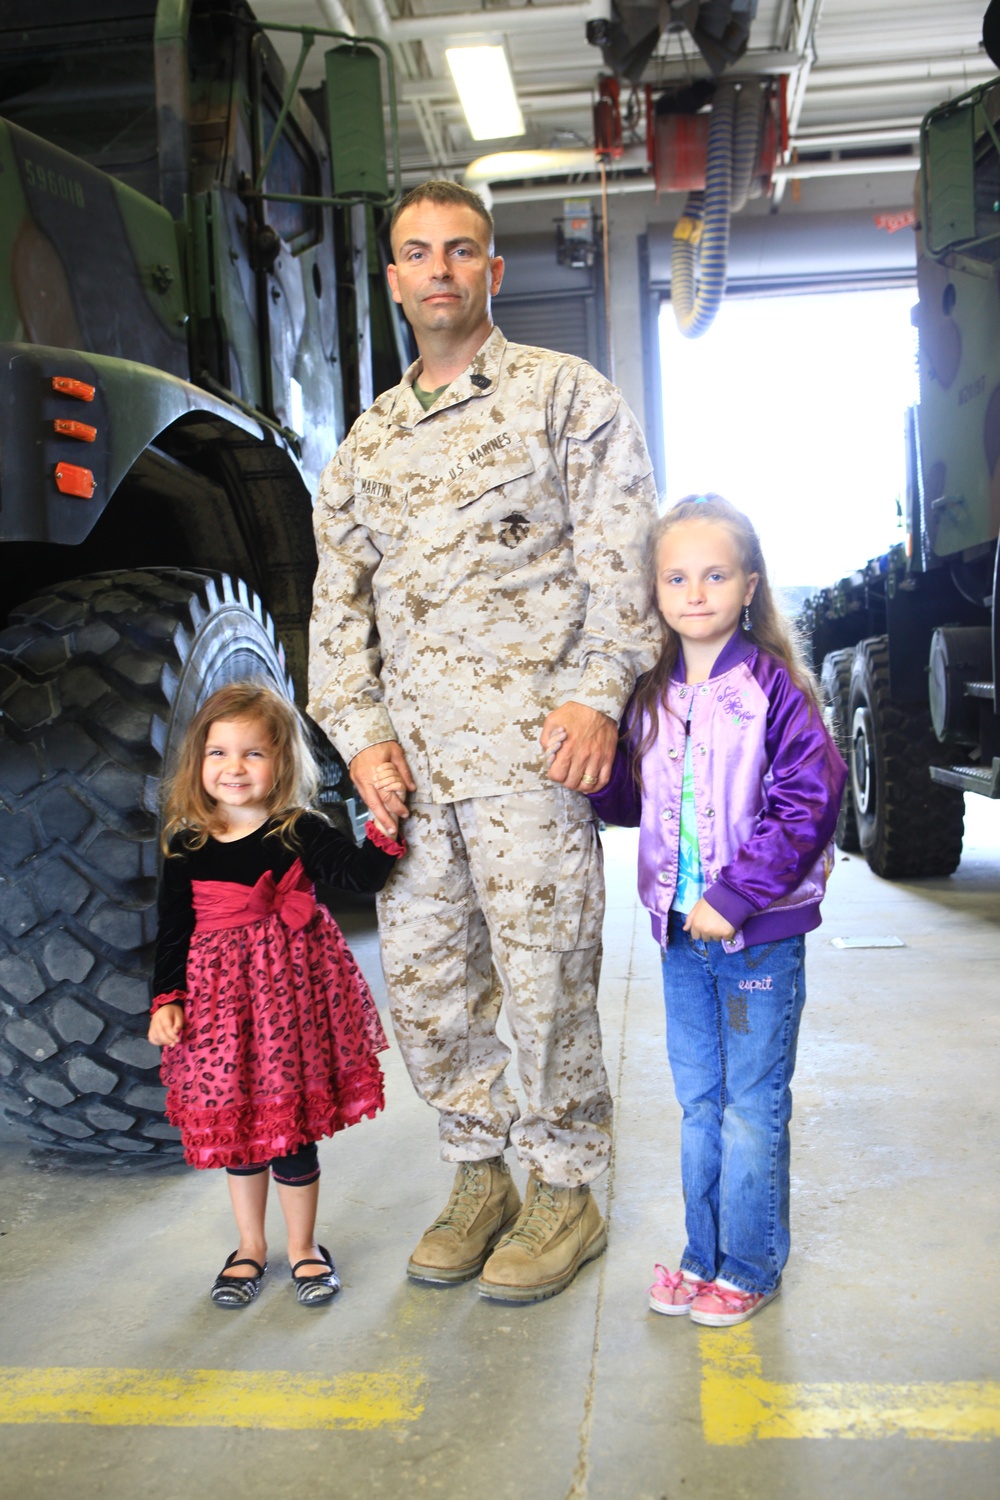 Paint, food and family: CLB-22 enjoys take your child to work day